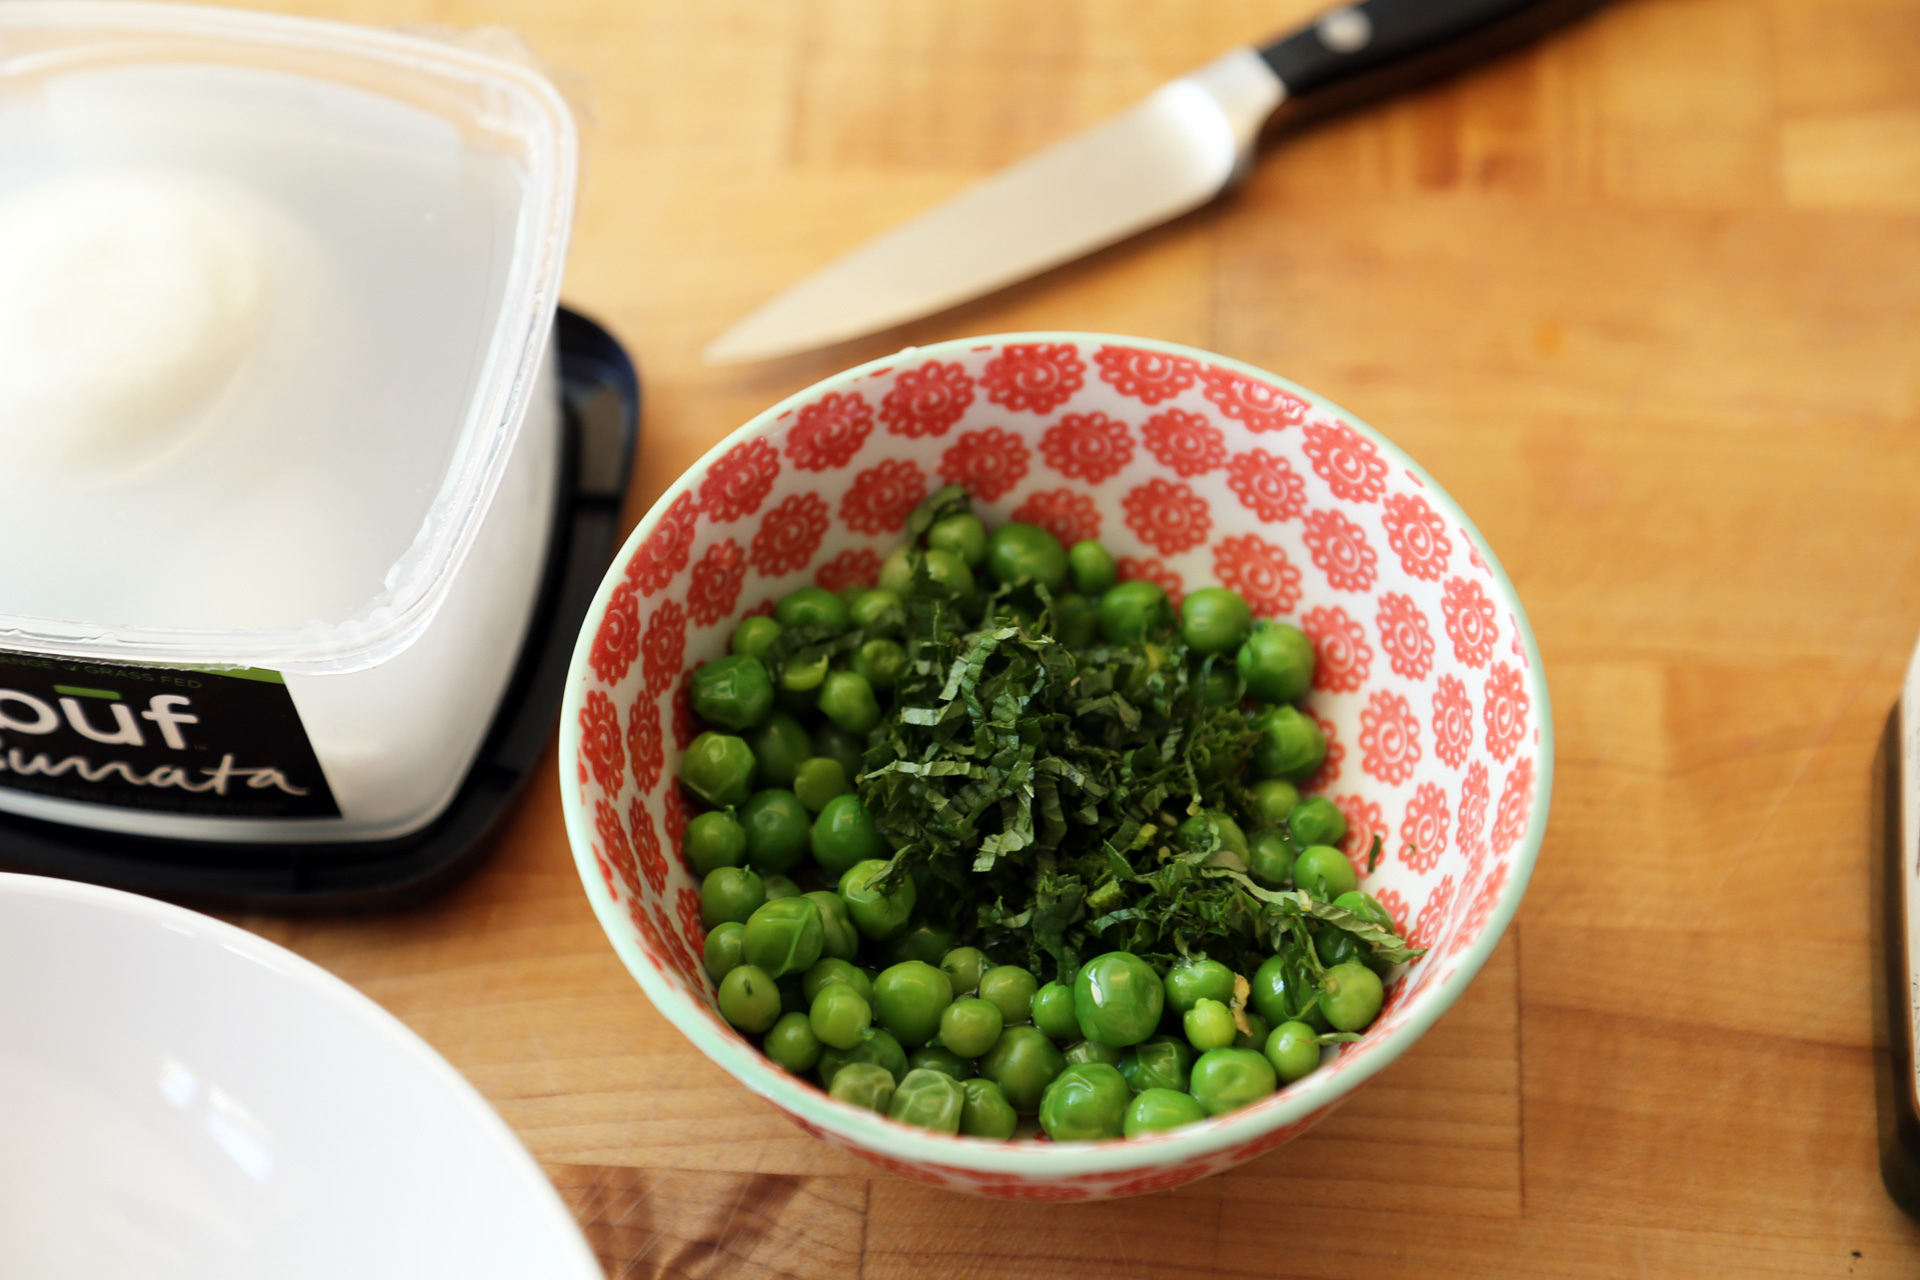 n a bowl, toss together the peas, olive oil, lemon juice, and mint.